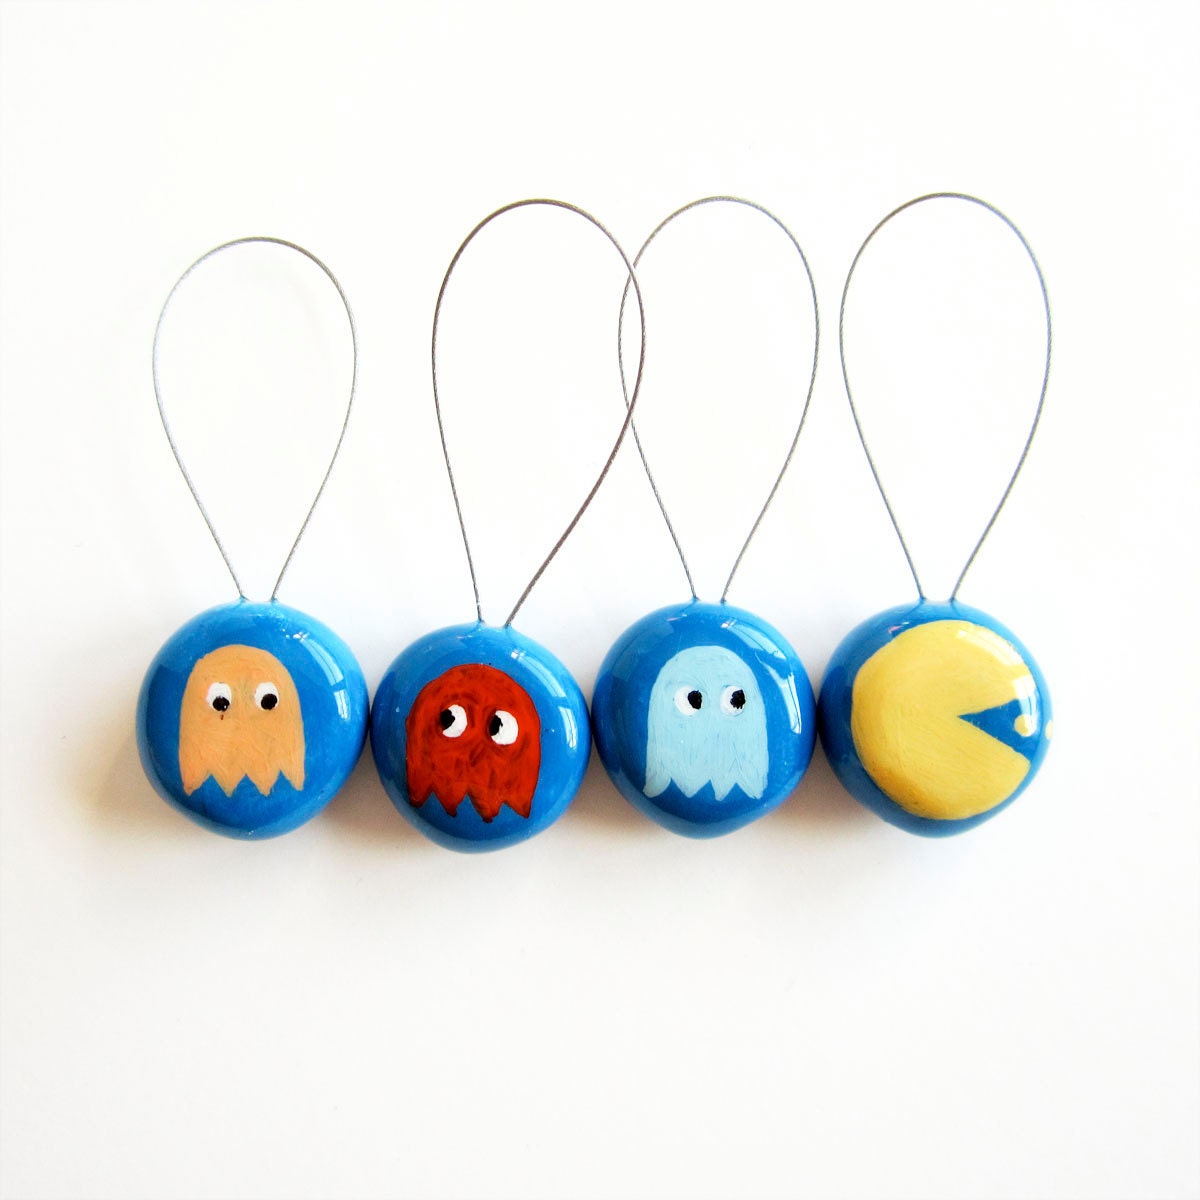 Snag Free Stitch Markers - Set of 4 Hand-Painted Pac-man